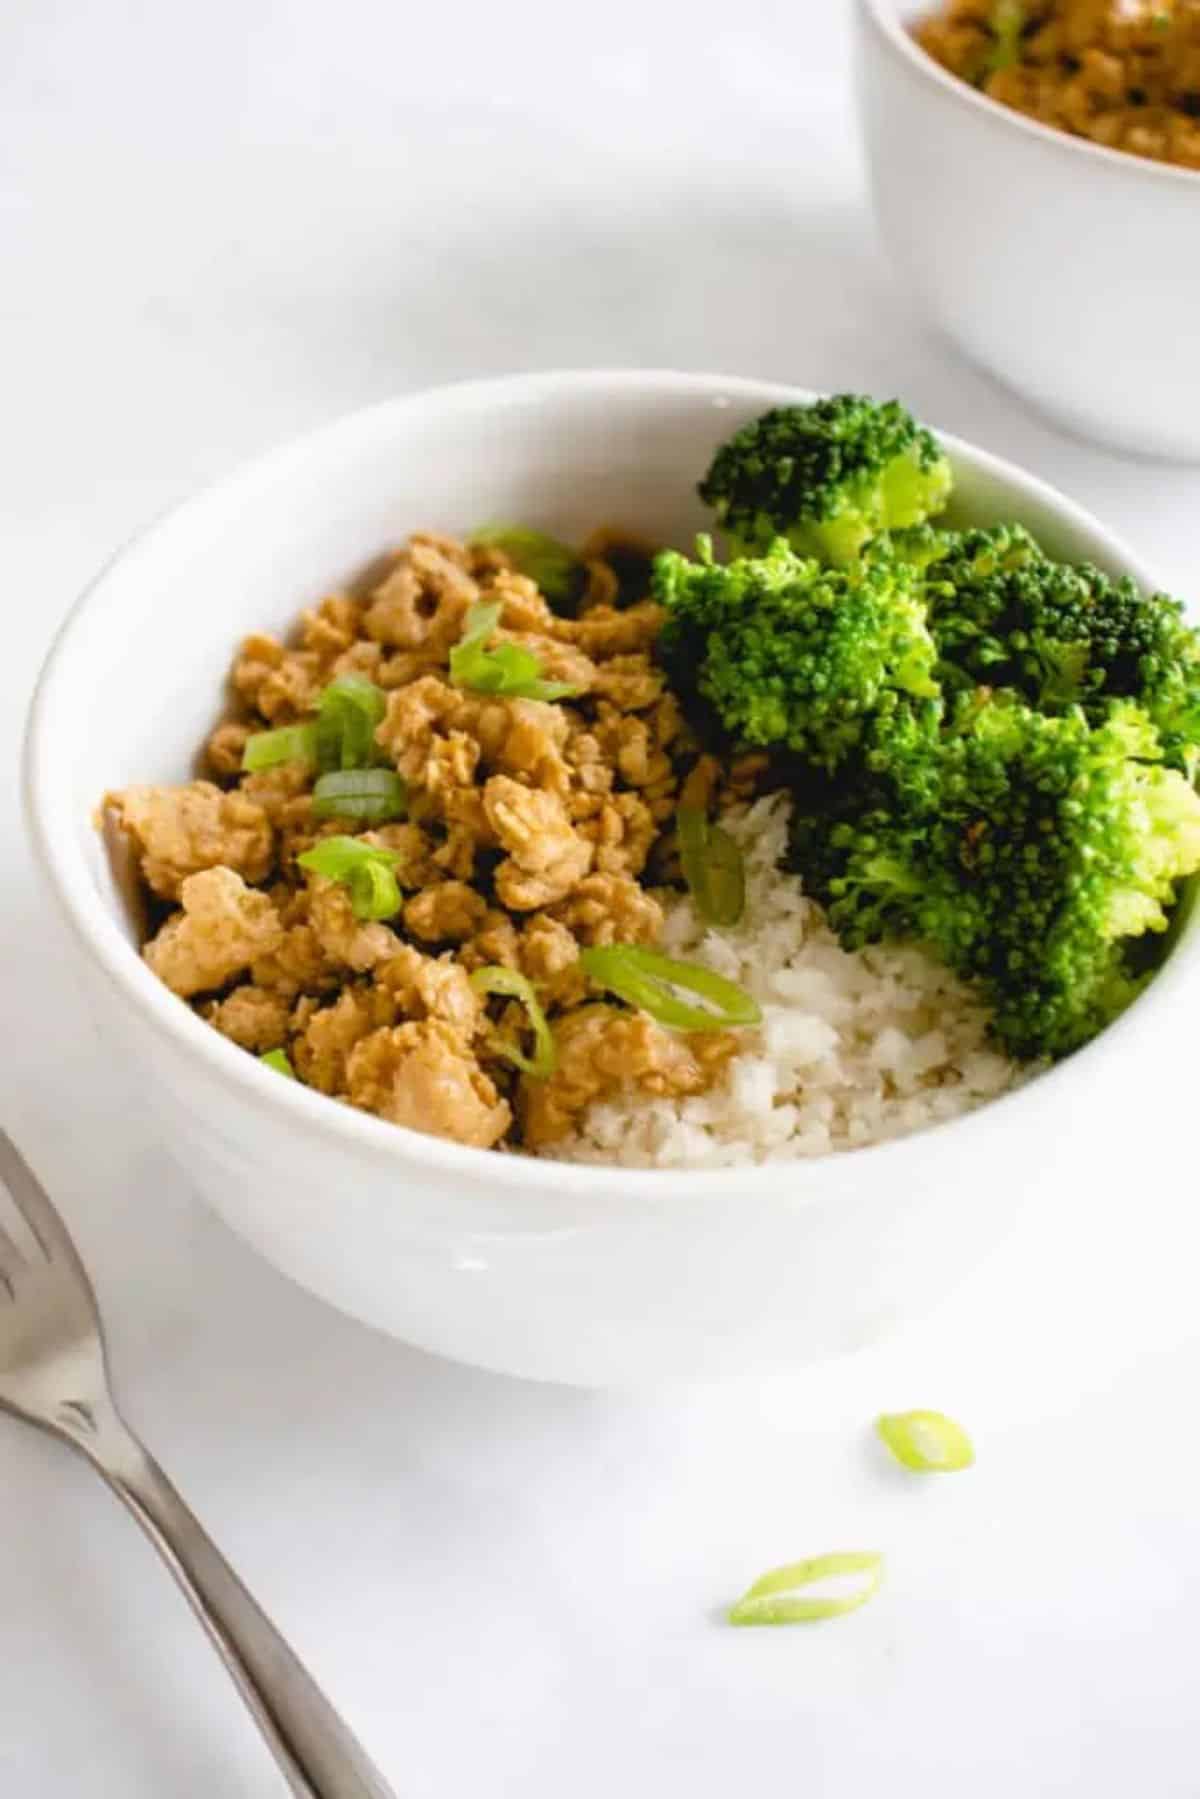 Gluten-Free Orange Chicken with broccoli and rice in a white bowl.